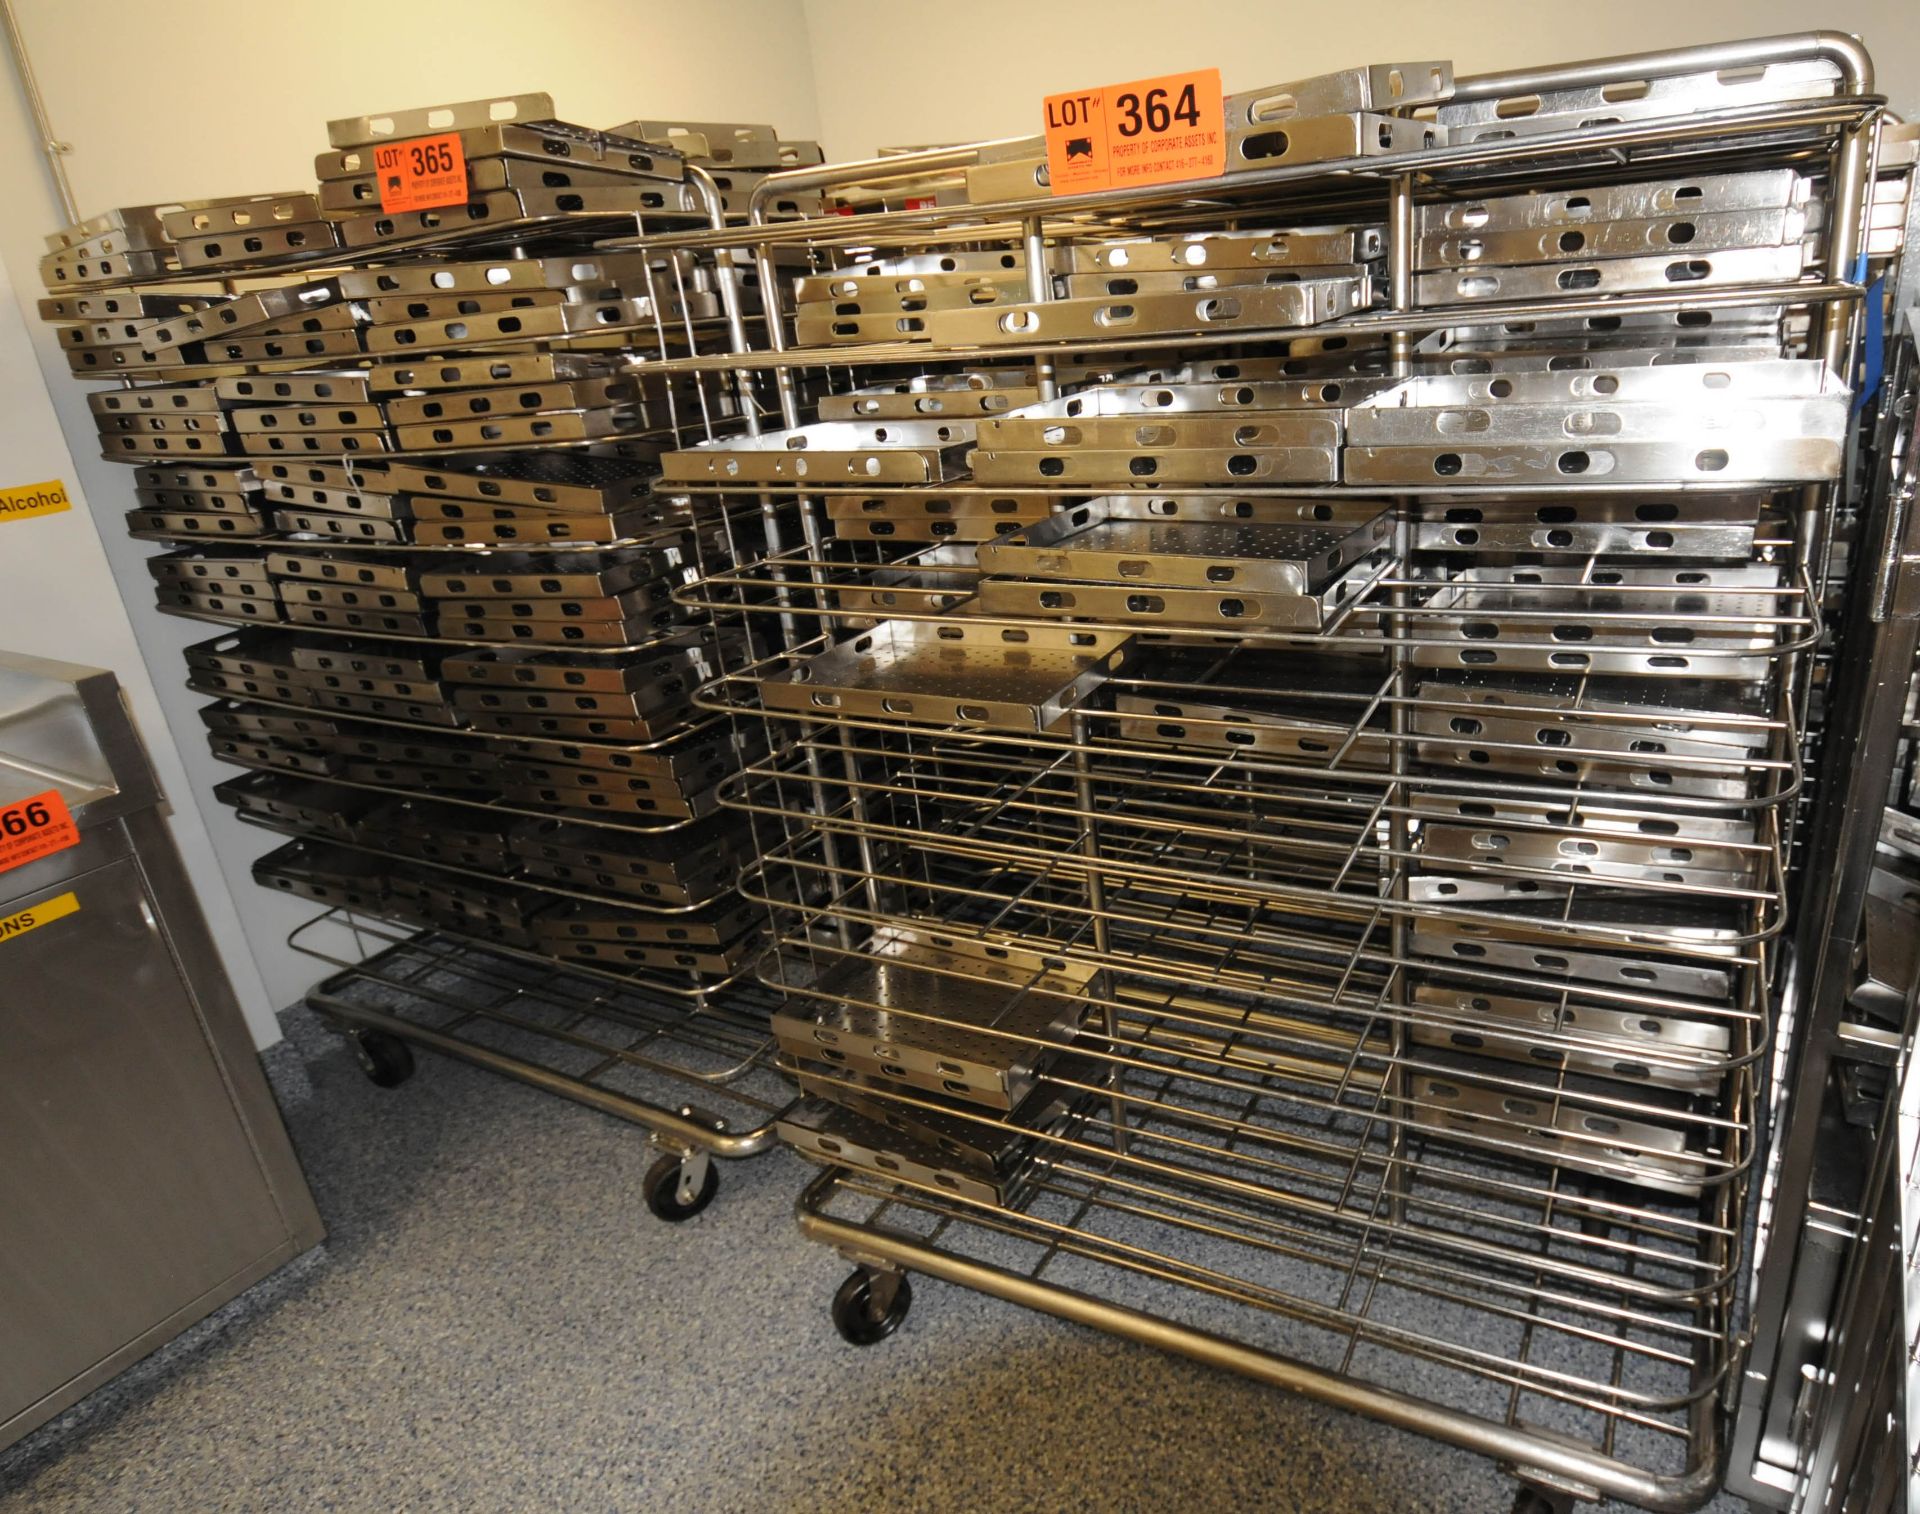 LOT/ 10.5" X 11.5" STAINLESS STEEL TRAYS WITH ROLLING RACKS (RM 322) [LOT 364 - REMOVAL FEE - $50